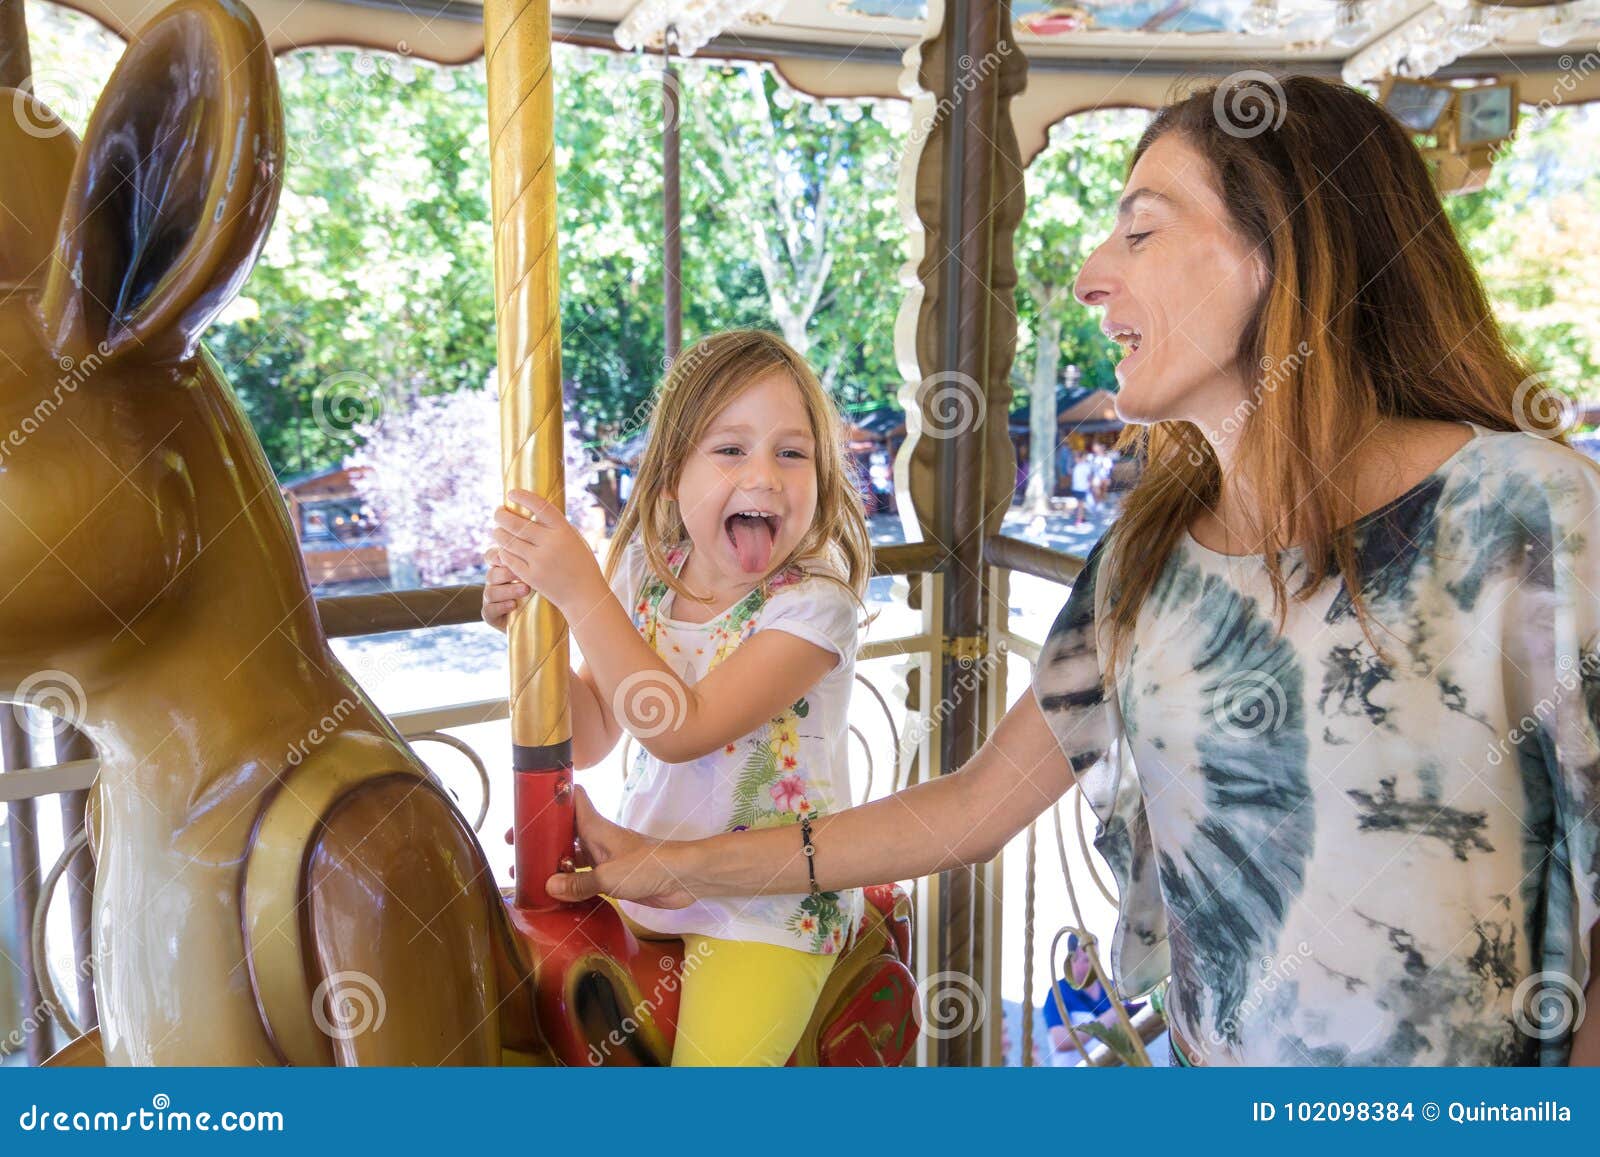 little girl in carousel with mother sticking her tongue out